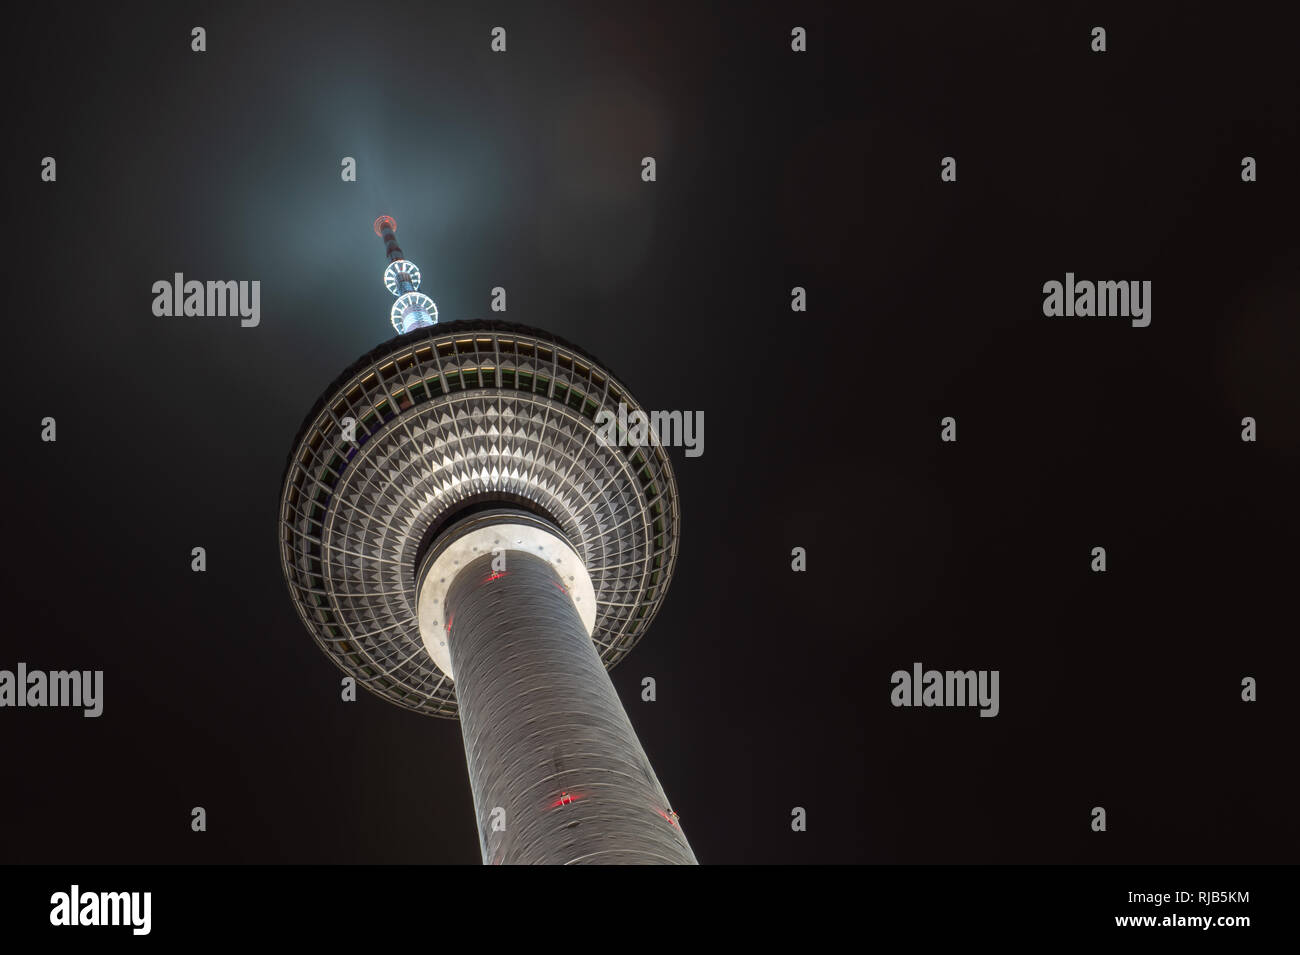 ,Background of a modern building in a popular European city. Berlin Germany. Silver sphere of Fernsehturm TV tower by night Stock Photo